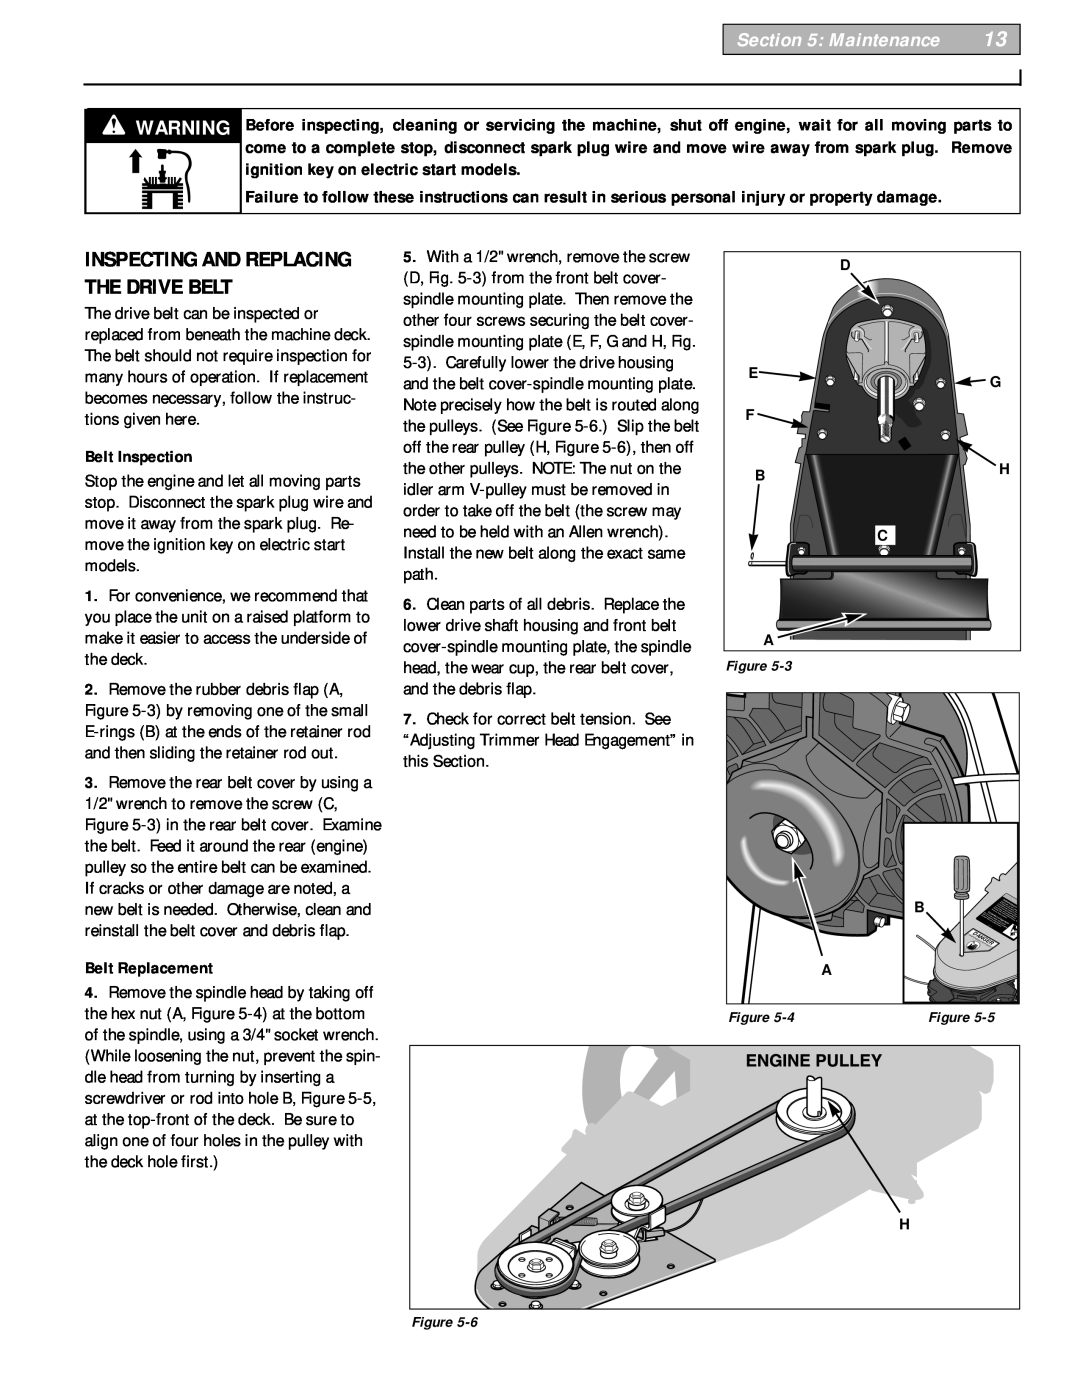 Troy-Bilt 52065 owner manual Maintenance, Inspecting And Replacing The Drive Belt, Belt Inspection, Belt Replacement 